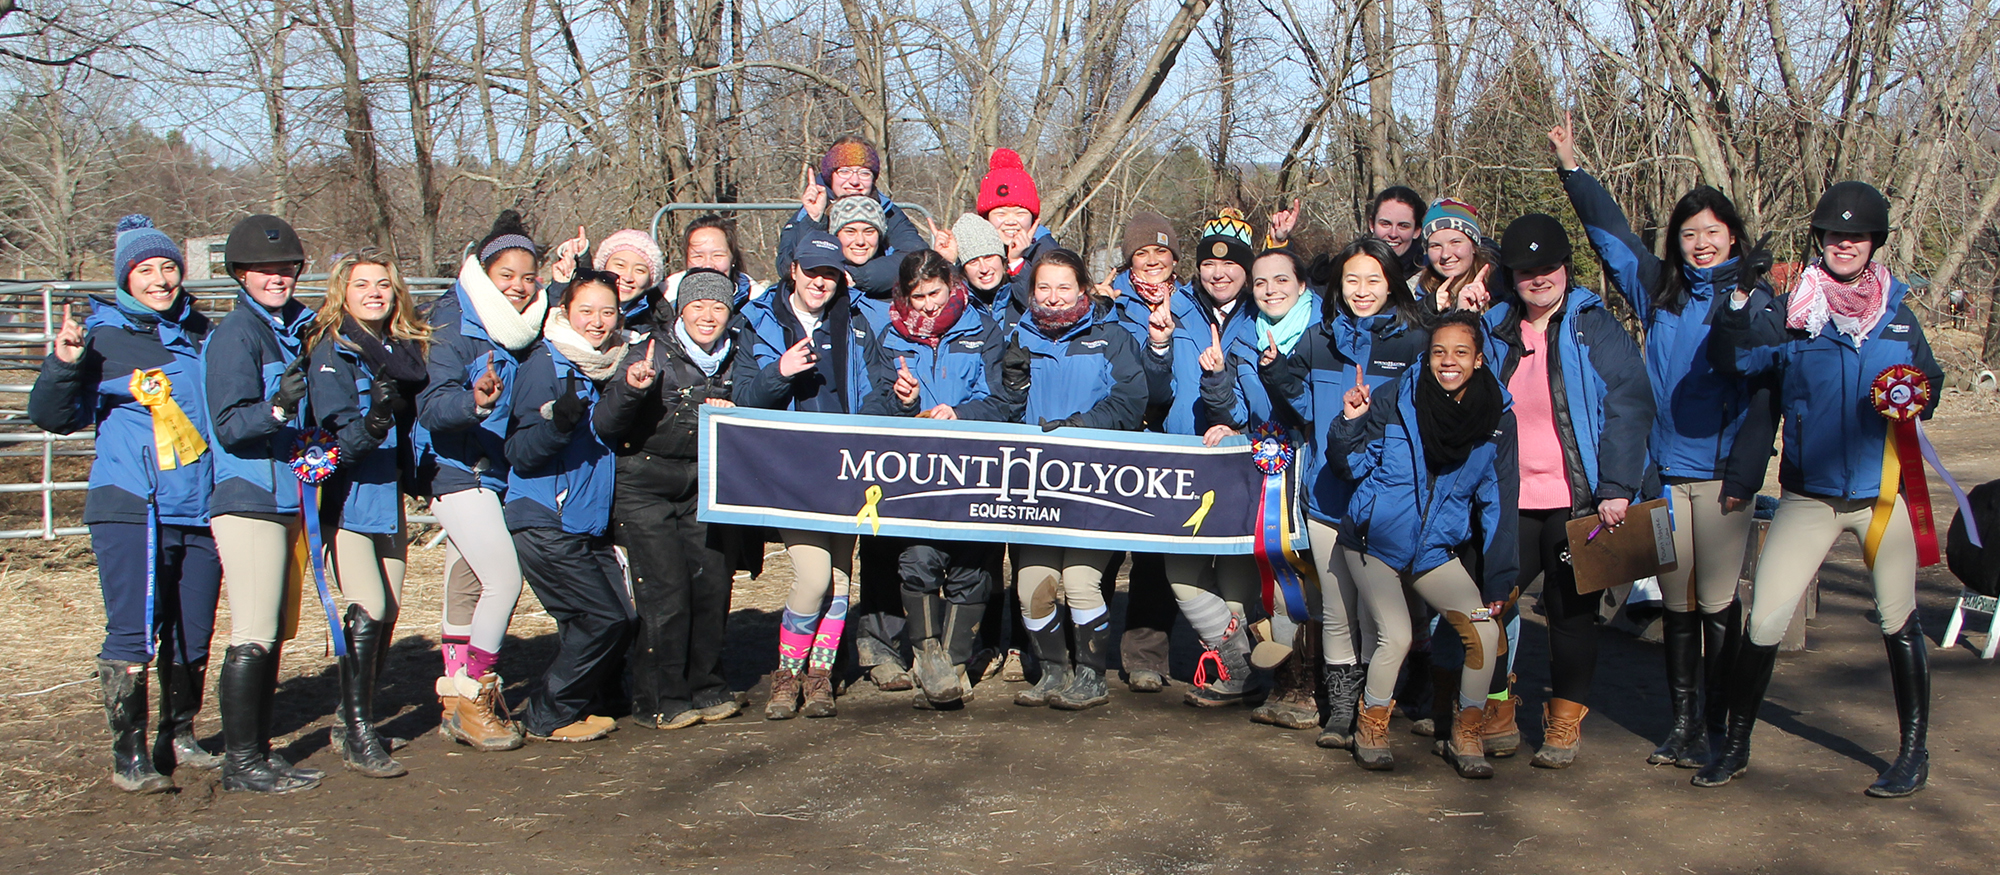 Group photo of the Lyons riding team following their victory at the Hampshire College Show on March 23, 2019.